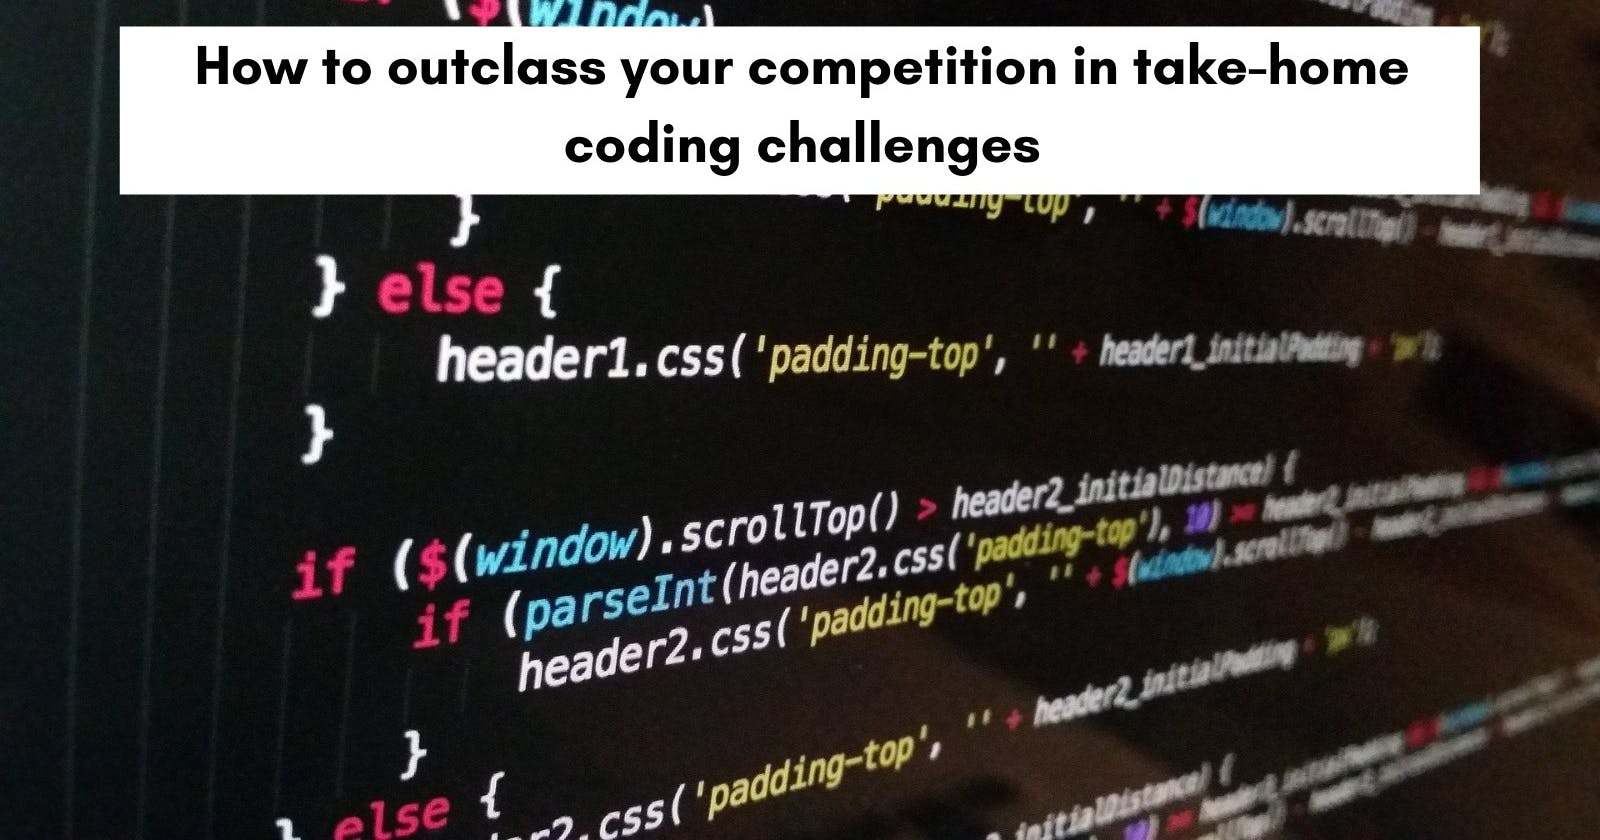 How to outperform your competition in take-home coding challenges